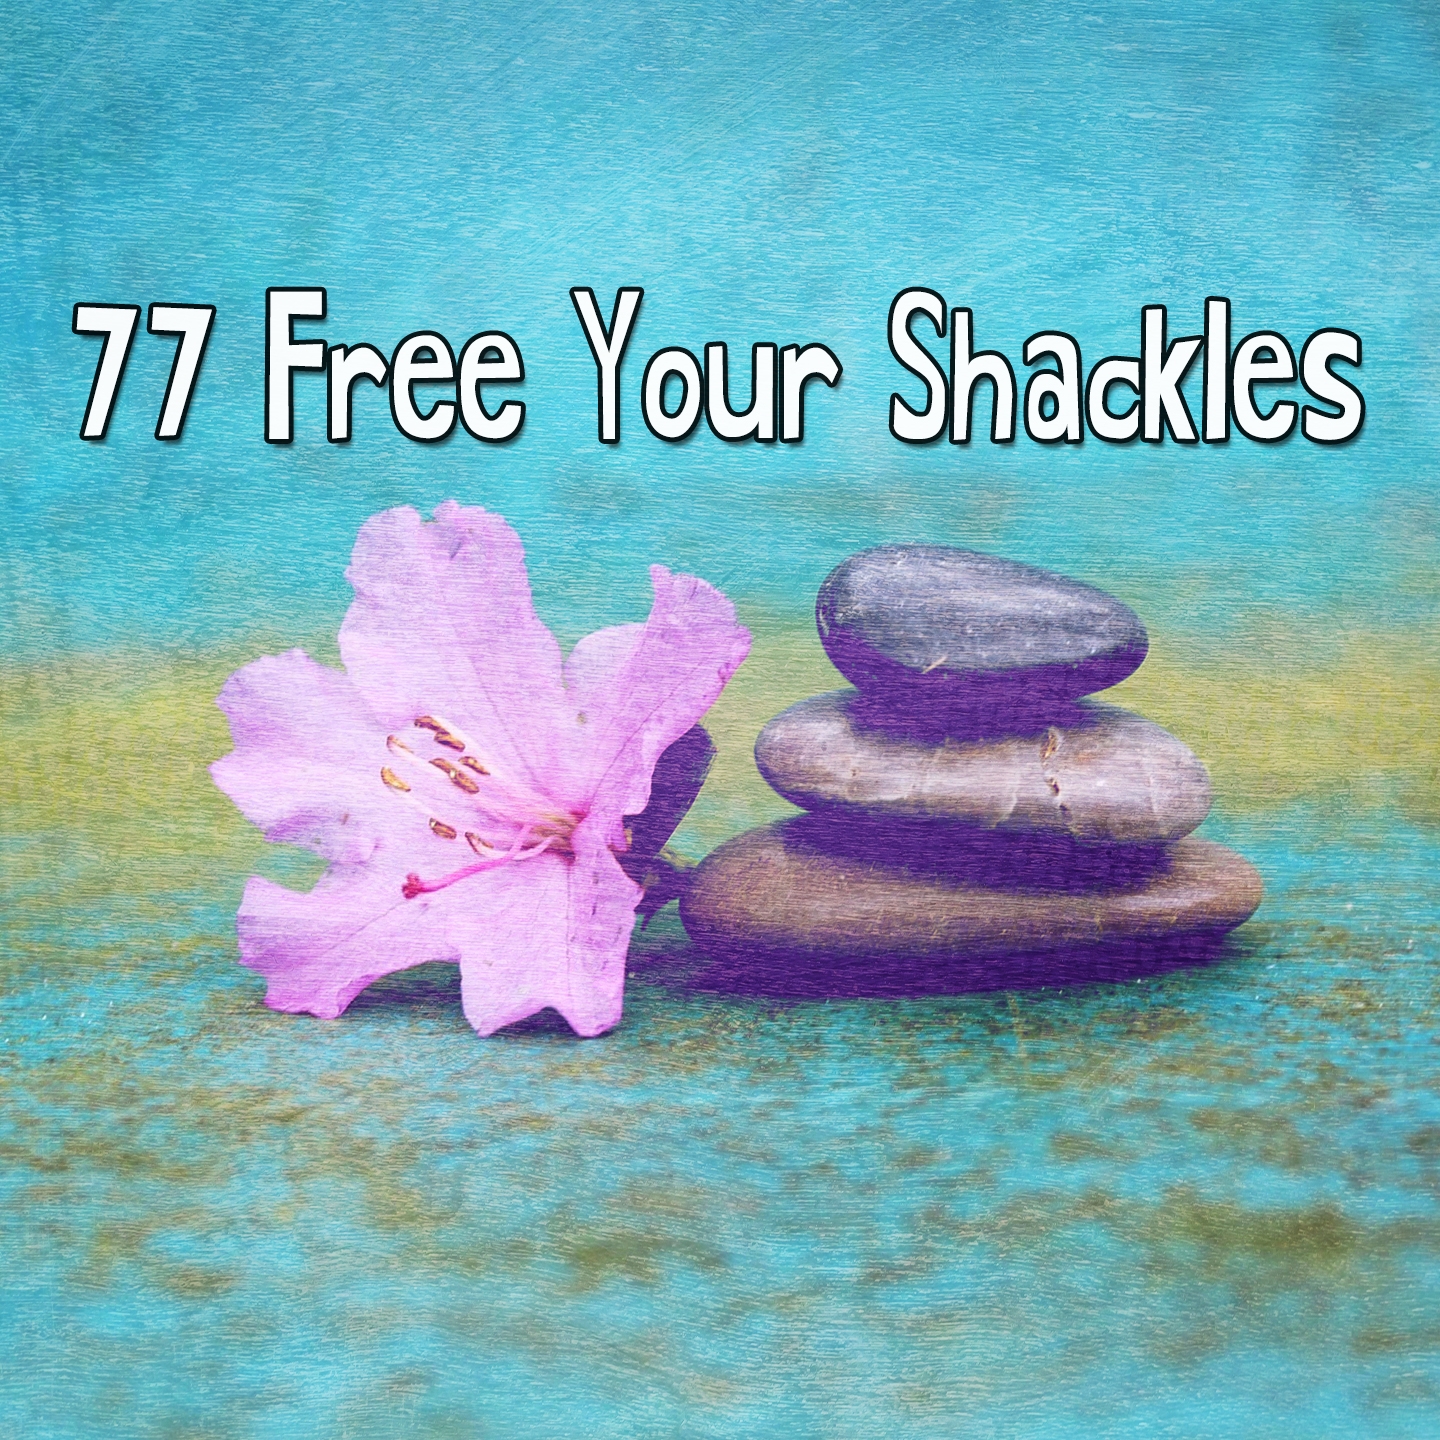 77 Free Your Shackles